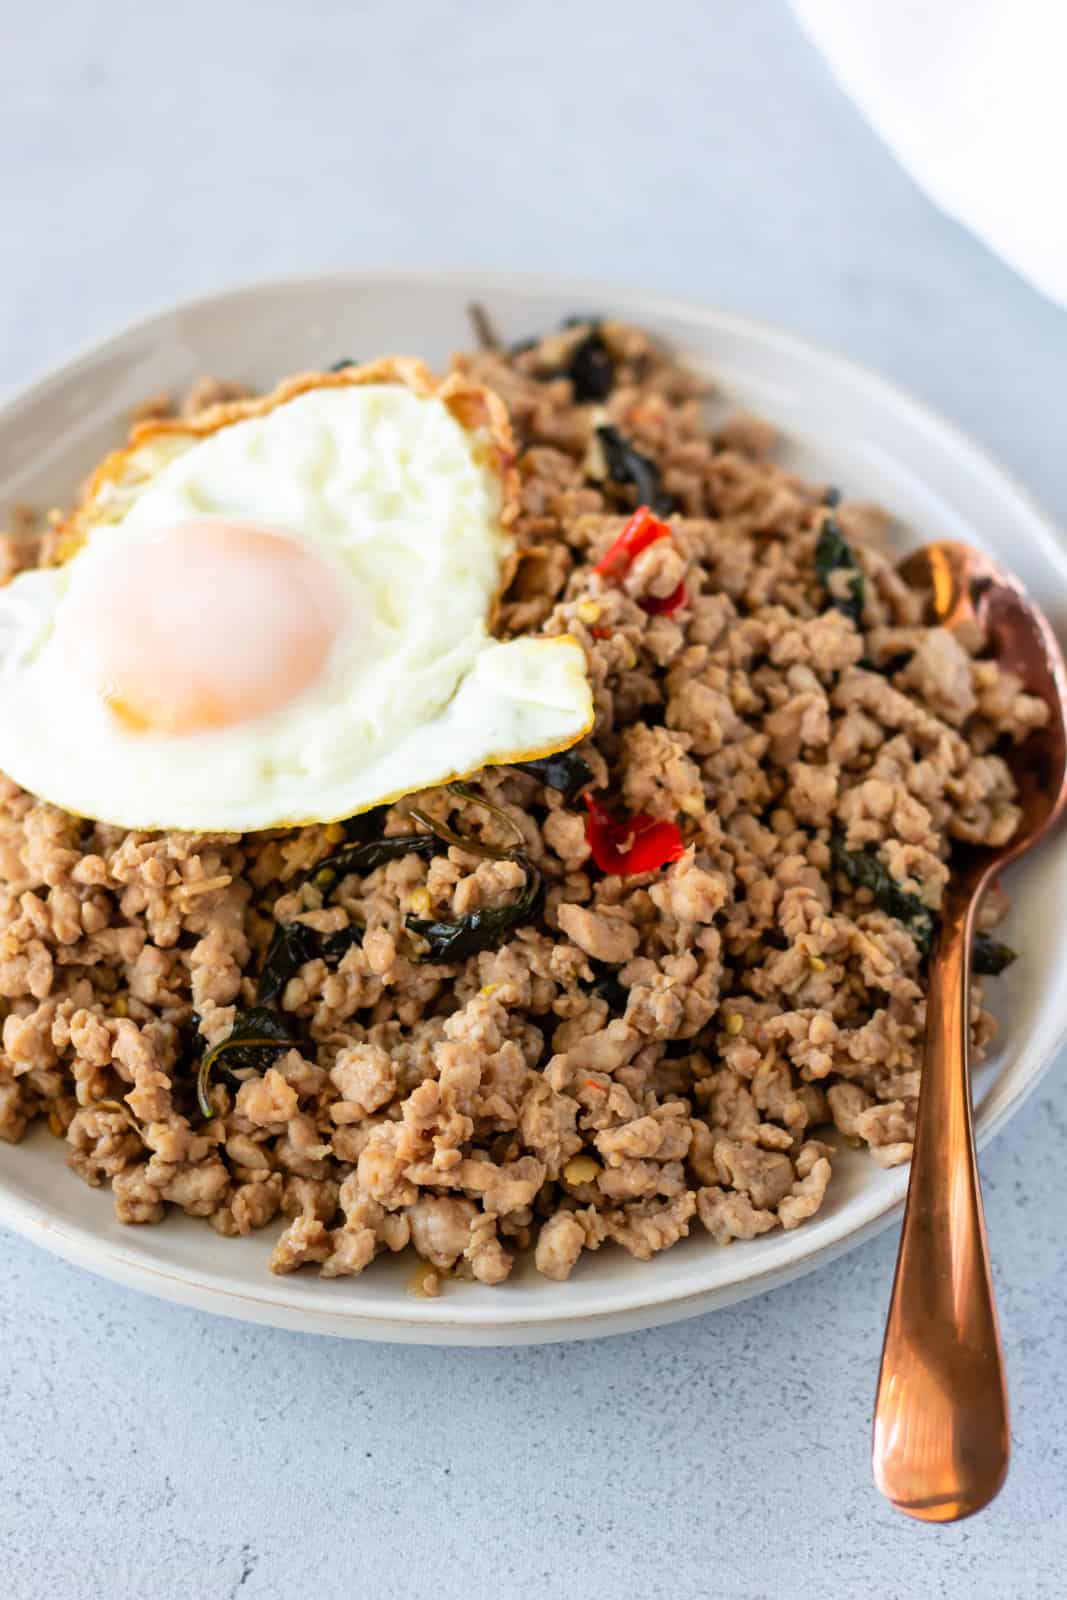 Ground pork stir fry on a white plate topped with a fried egg and bronze color spoon on the side.